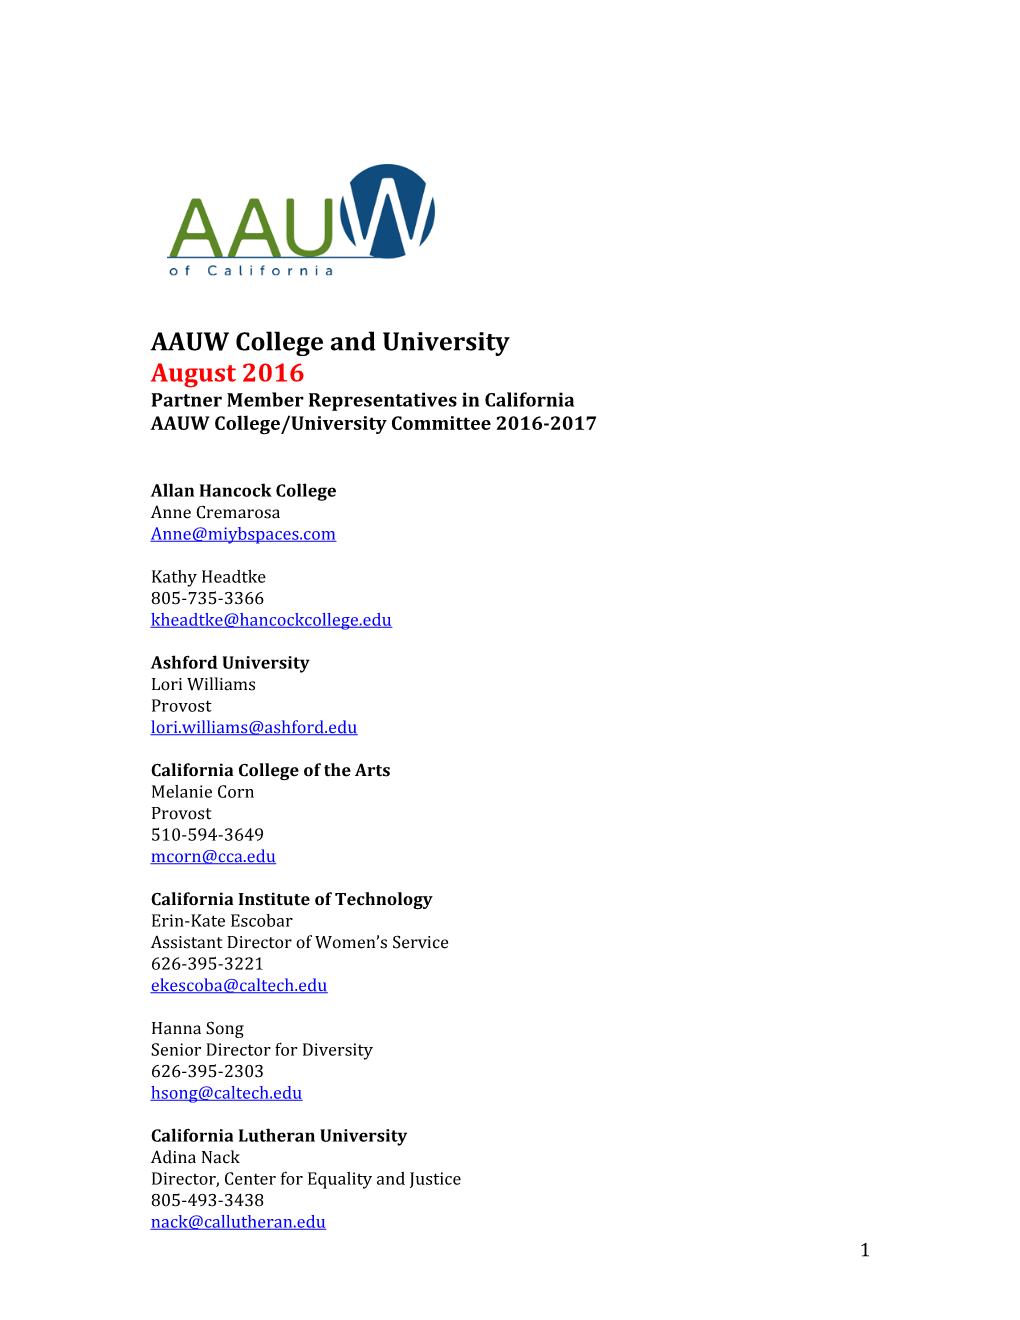 AAUW College and University